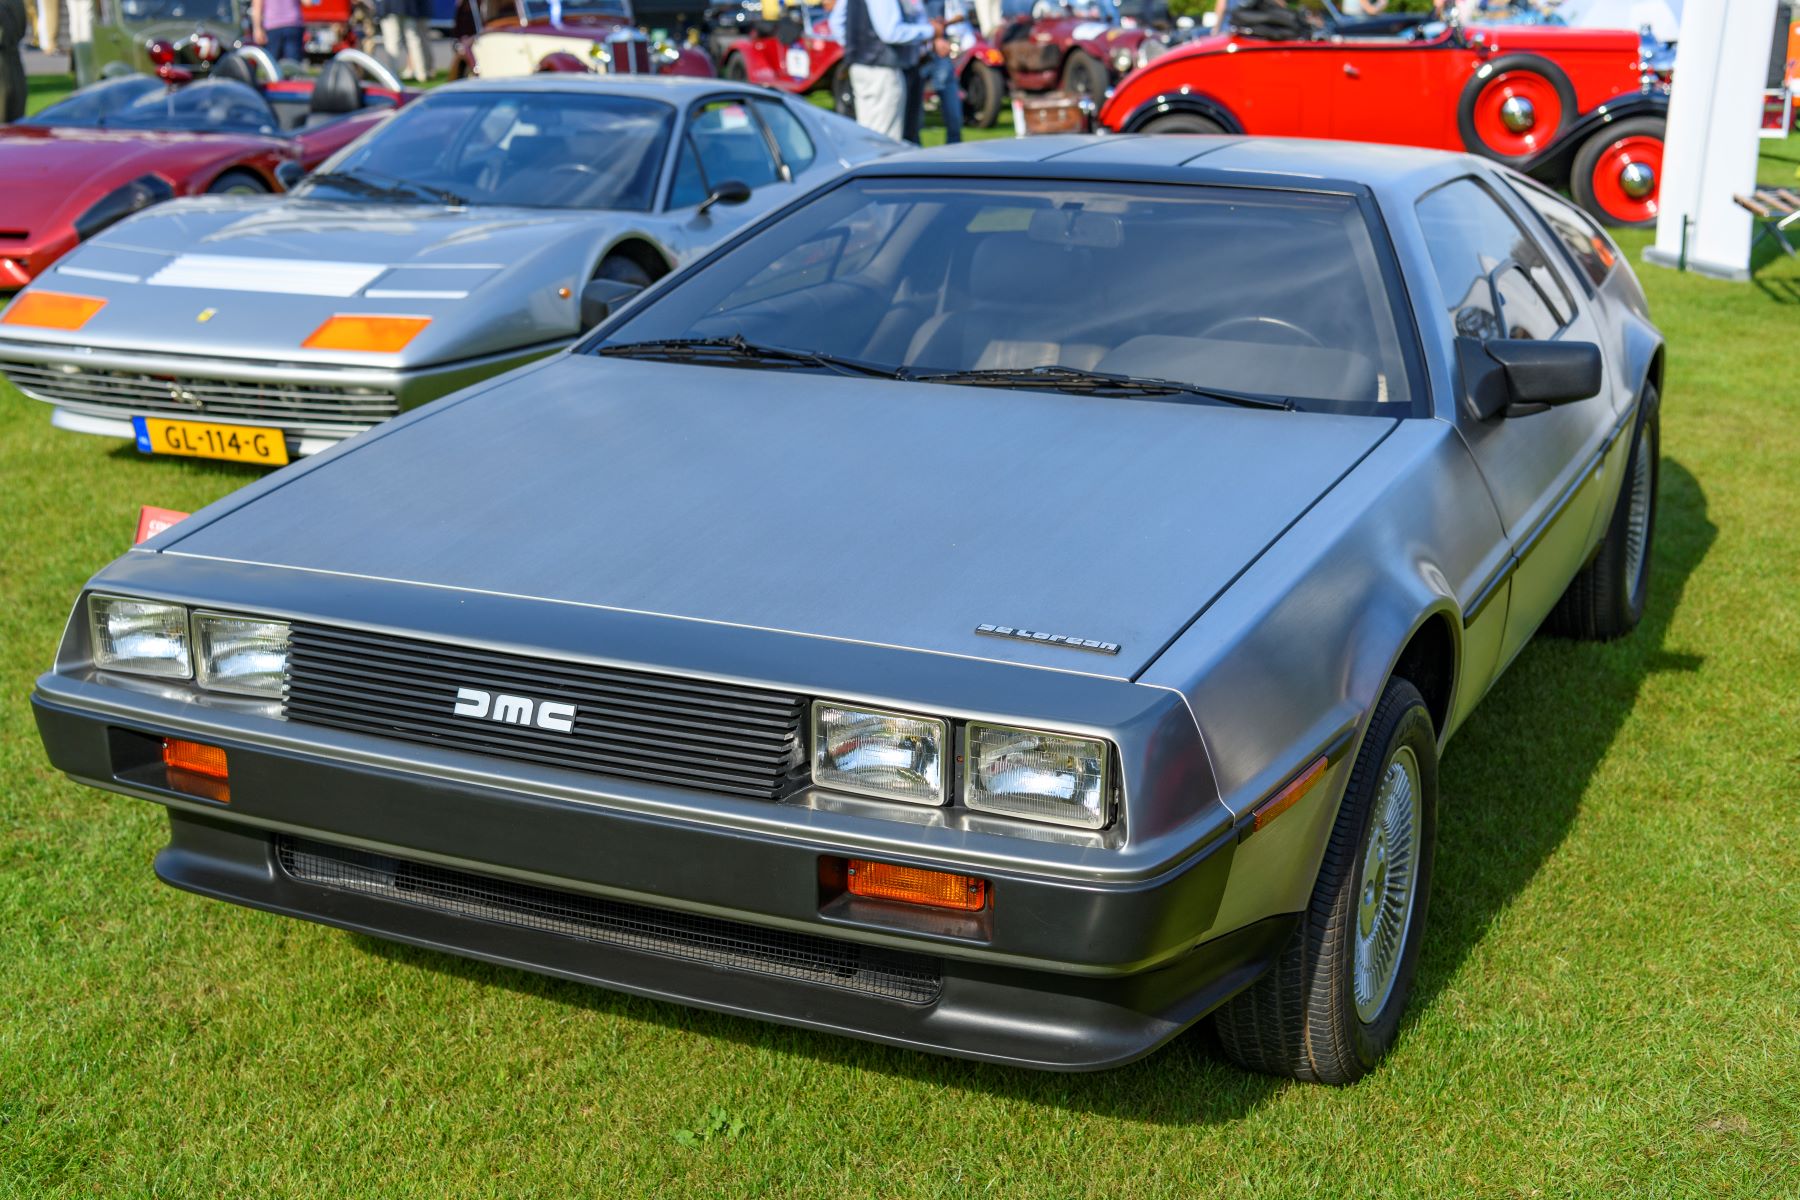 The DeLorean DMC-12 stainless steel car at the 2019 Concours d'Elegance at the Soestdijk palace in Baarn, Netherlands